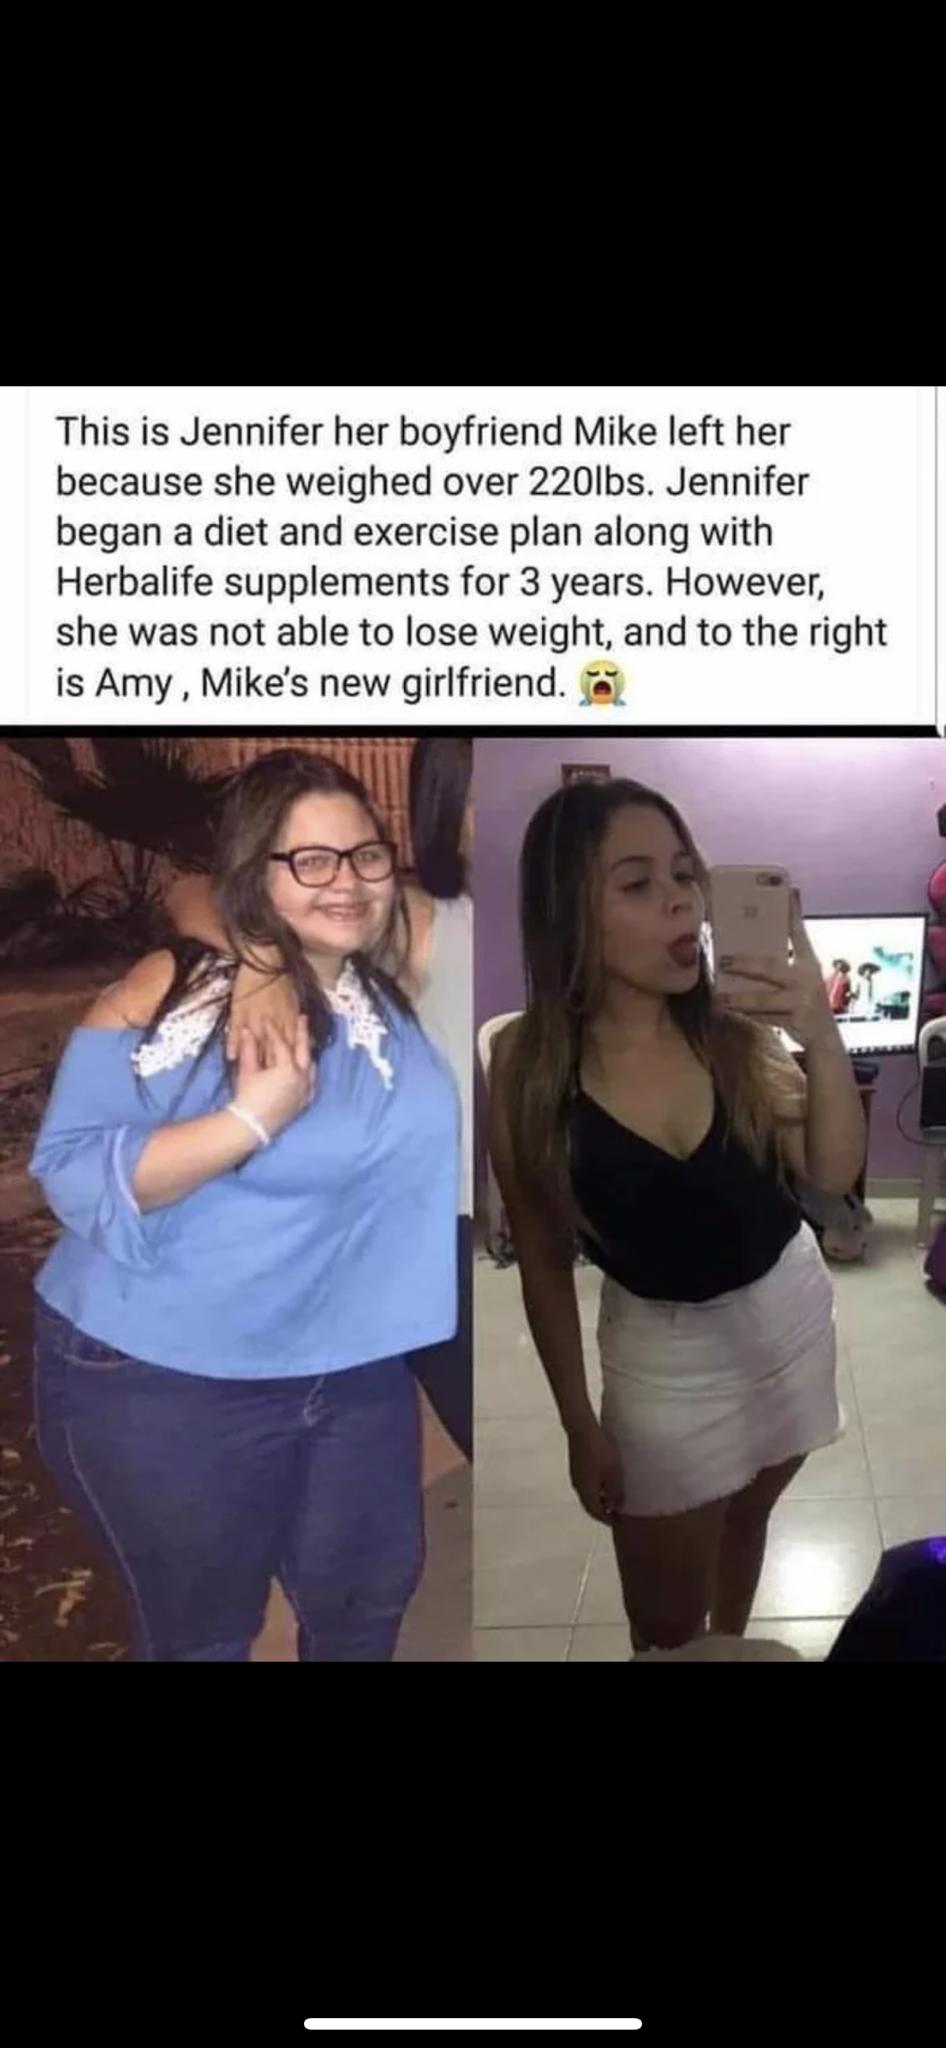 illinois meme - This is Jennifer her boyfriend Mike left her because she weighed over 220lbs. Jennifer began a diet and exercise plan along with Herbalife supplements for 3 years. However, she was not able to lose weight, and to the right is Amy, Mike's n